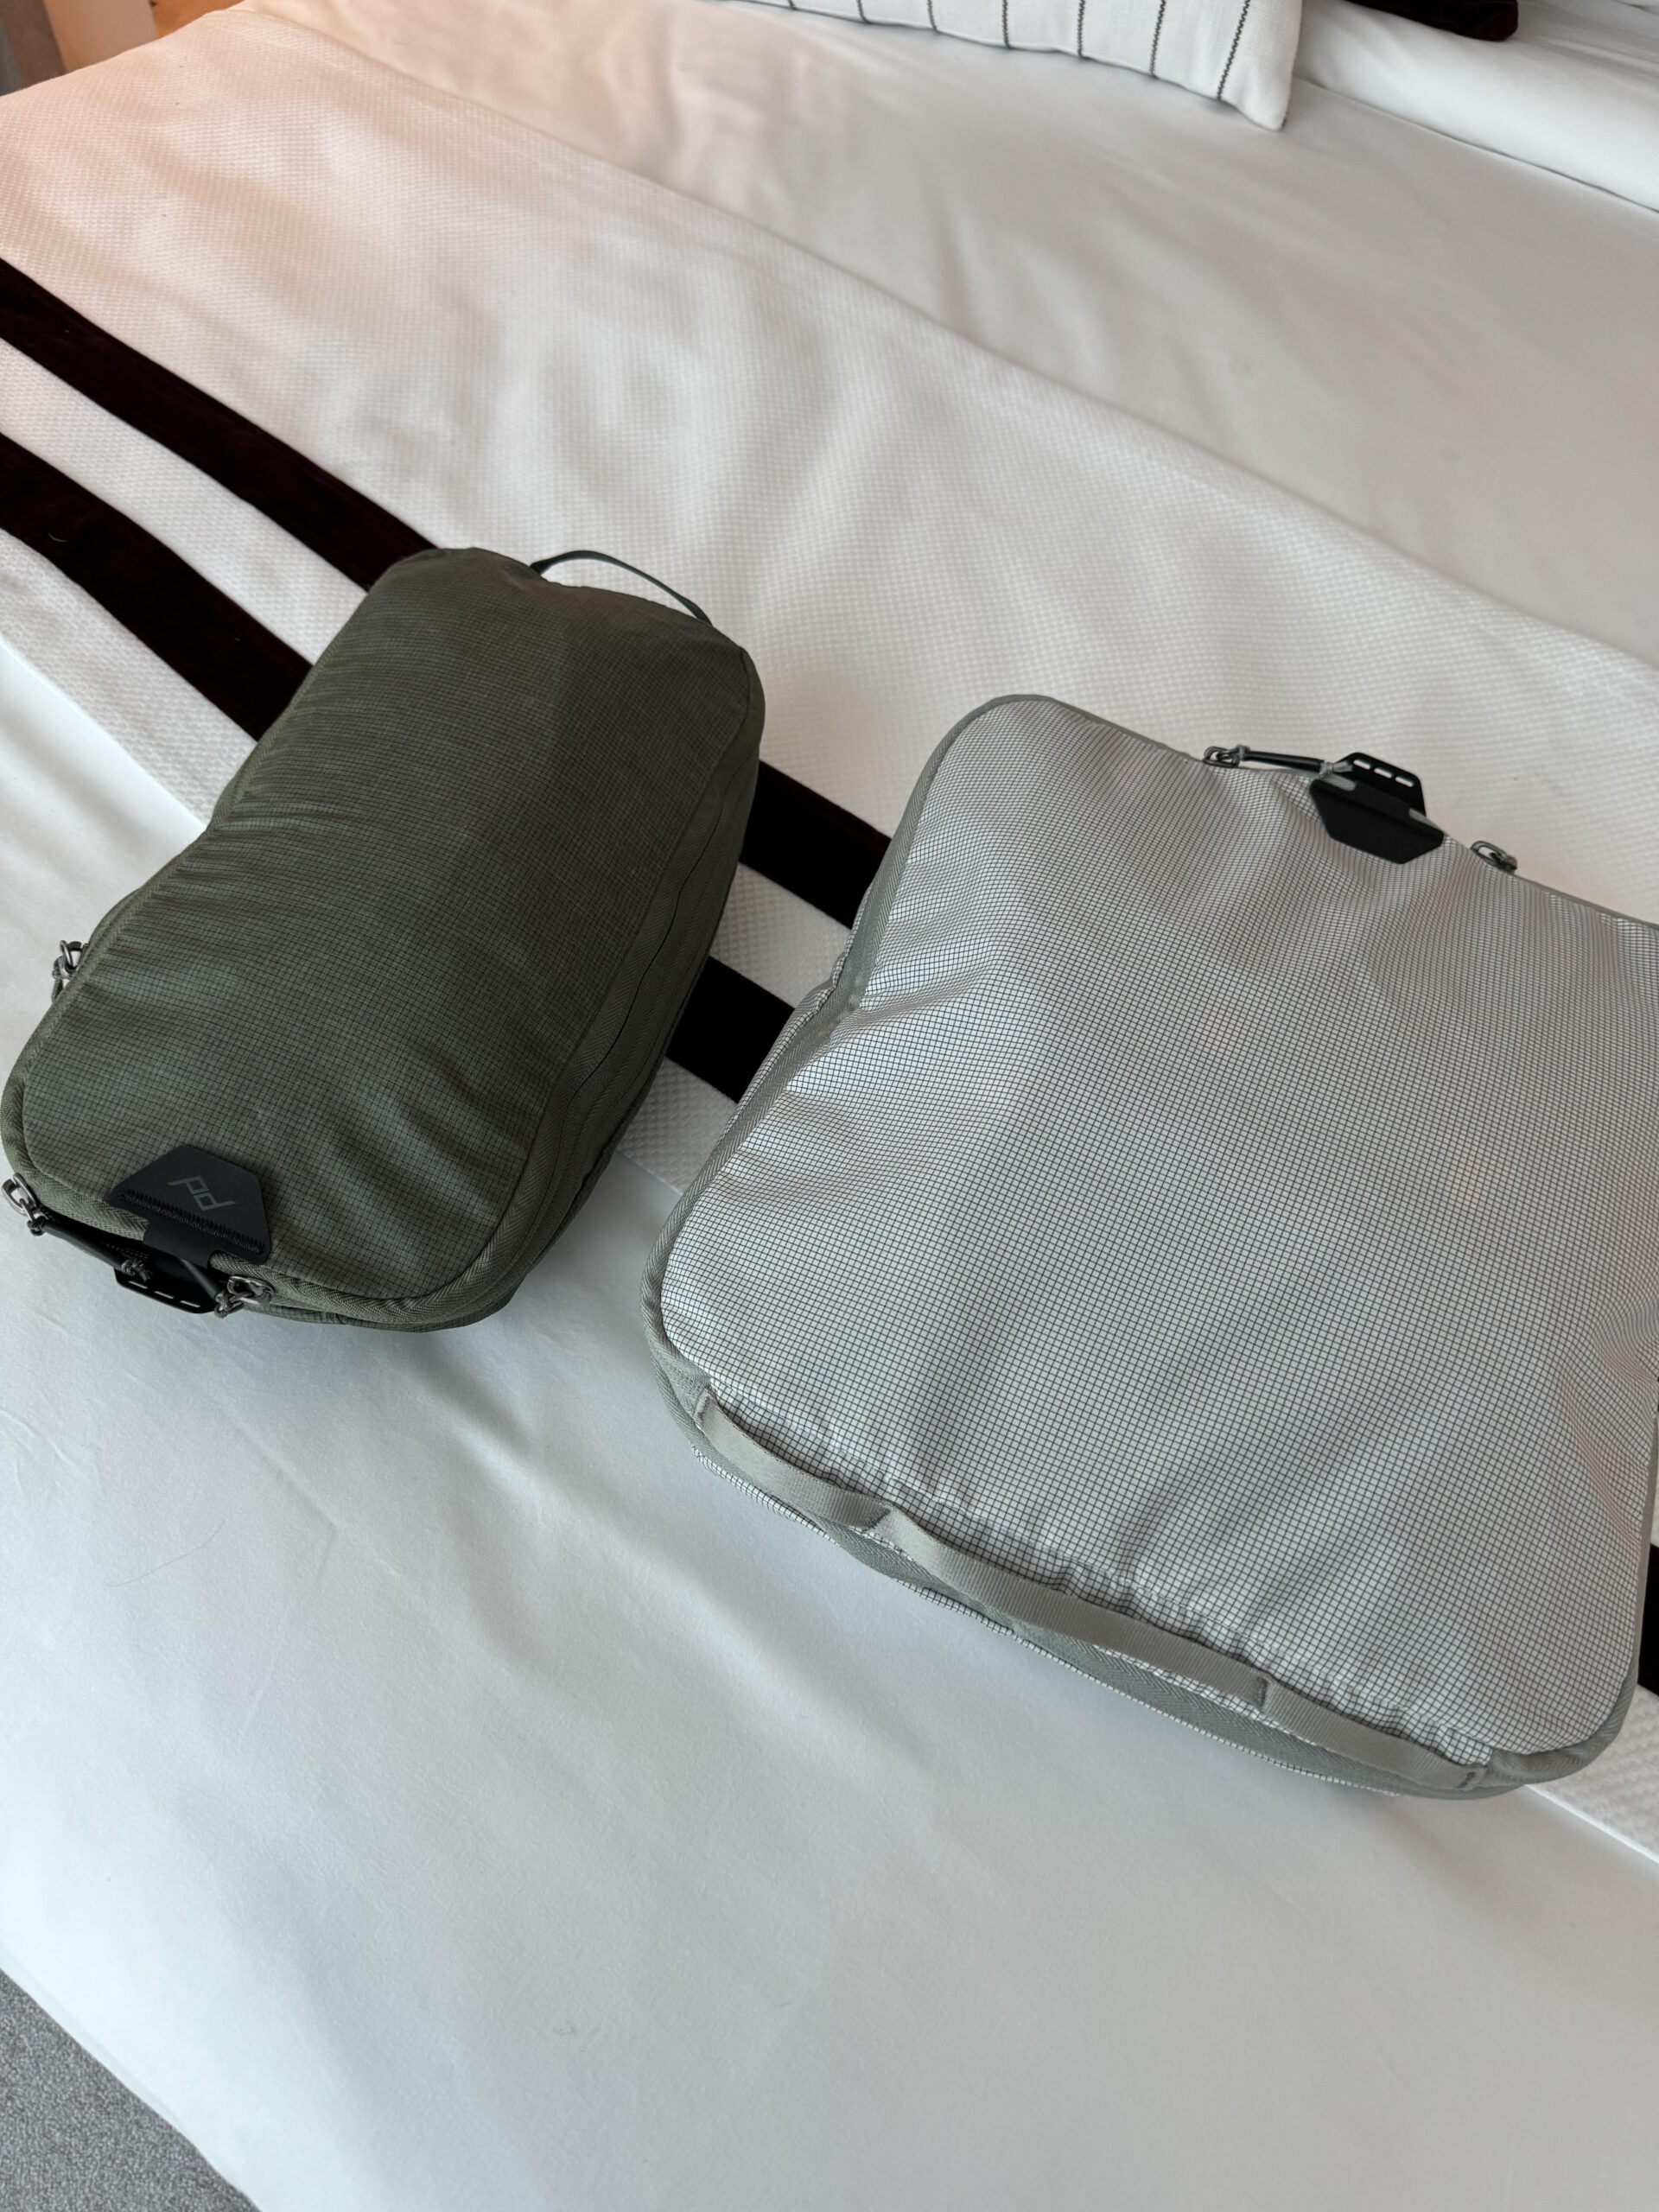 two packing cubes in different sizes